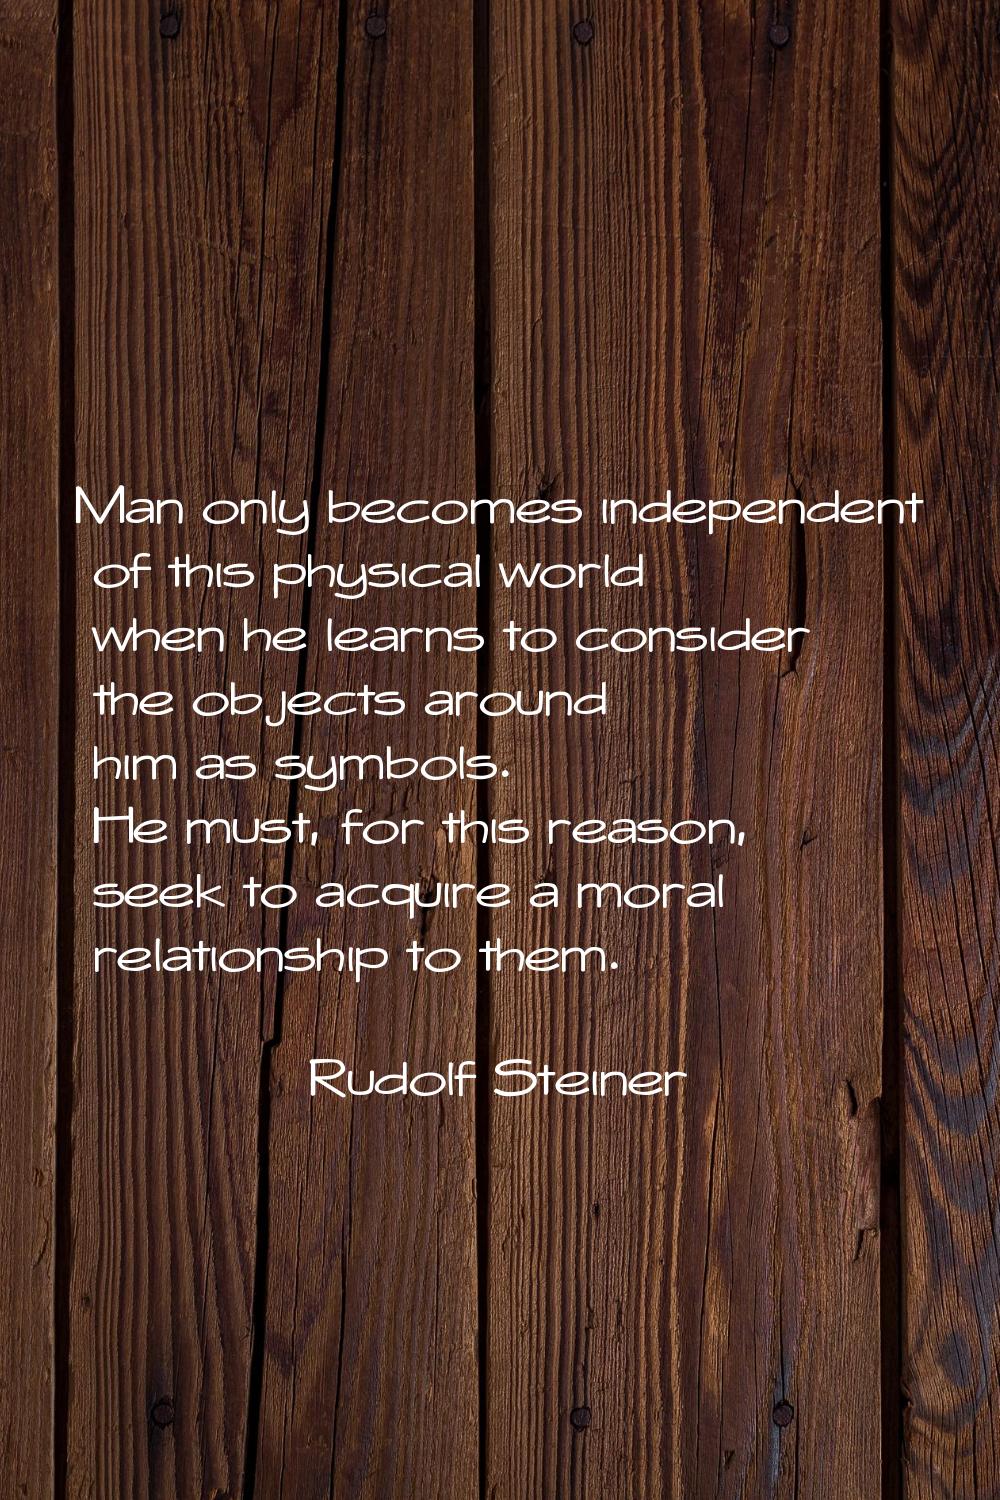 Man only becomes independent of this physical world when he learns to consider the objects around h